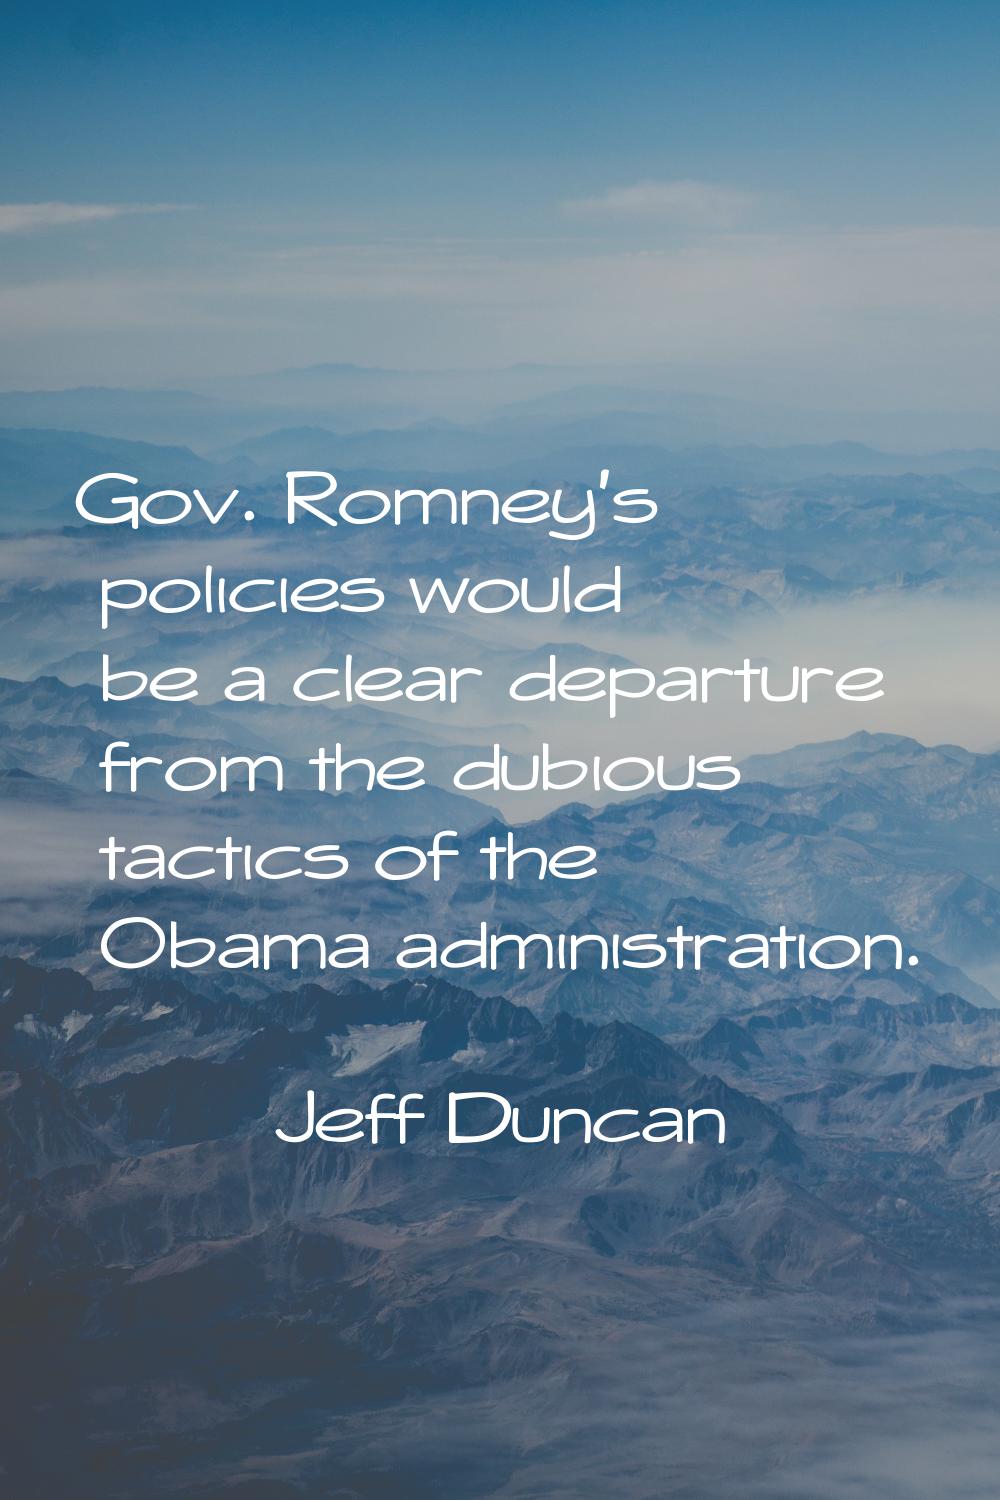 Gov. Romney's policies would be a clear departure from the dubious tactics of the Obama administrat